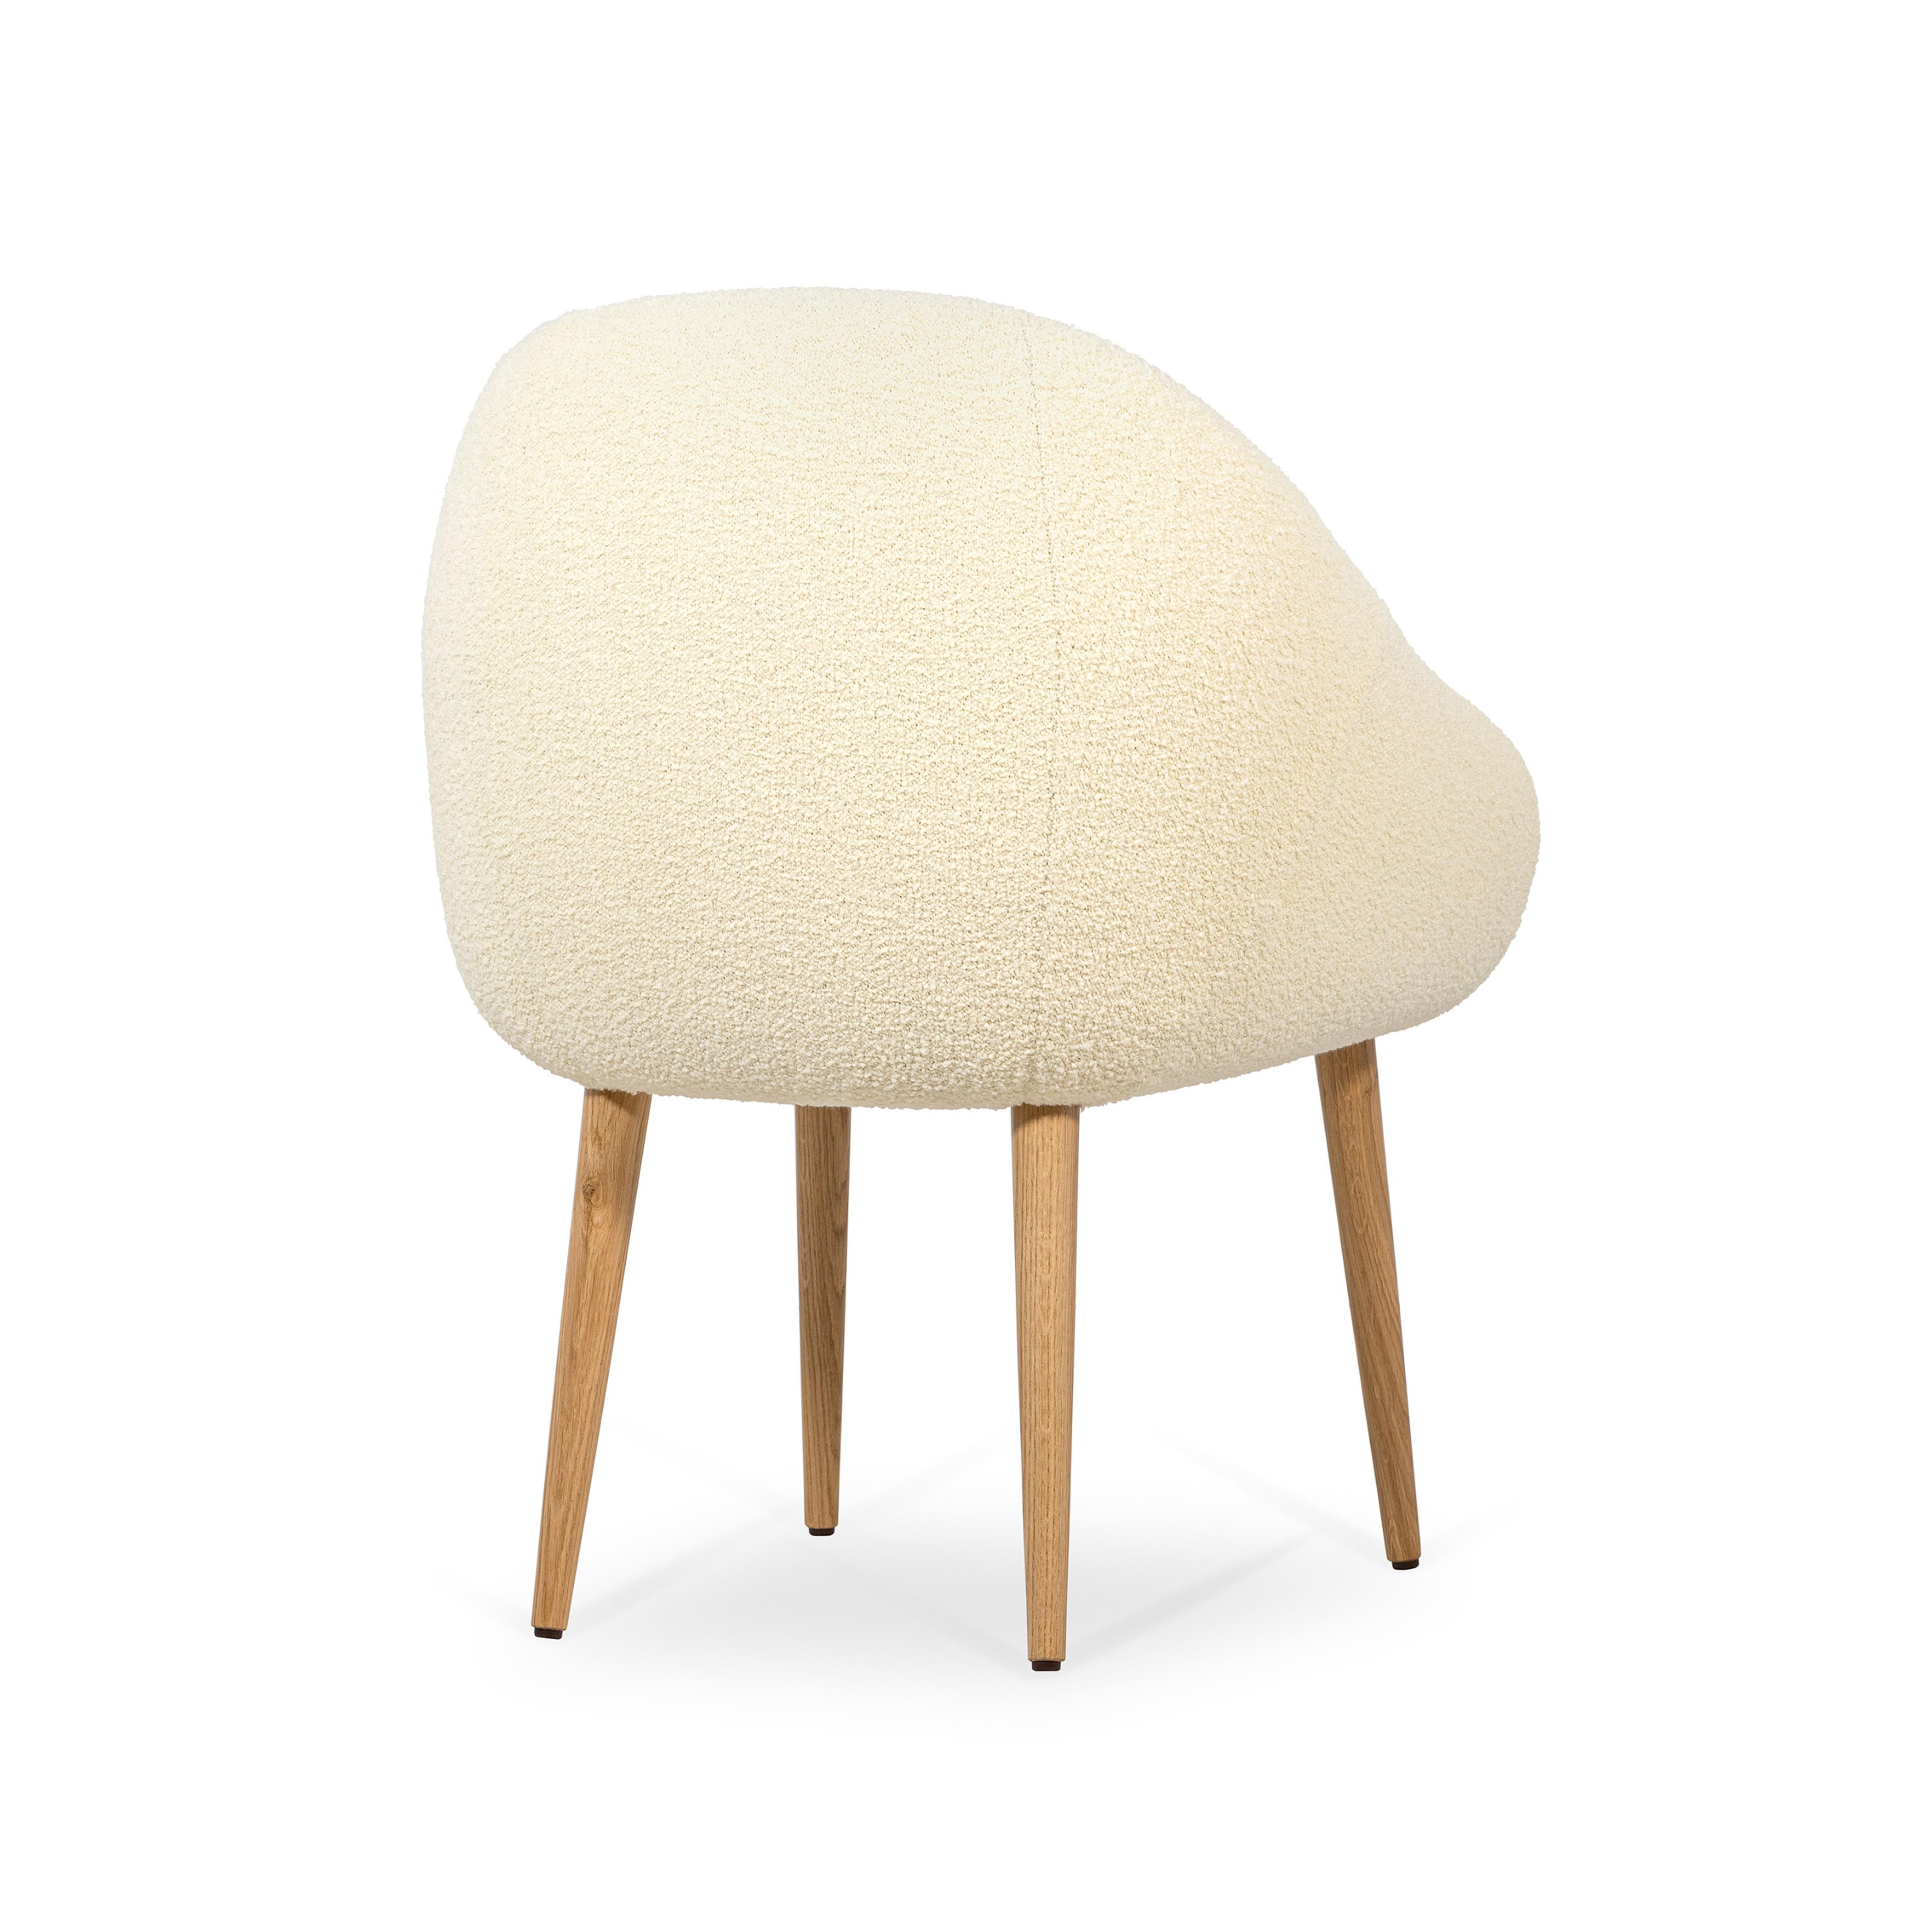 Portuguese Niemeyer Dining Chair, Bouclé and Oak, Insidherland by Joana Santos Barbosa For Sale